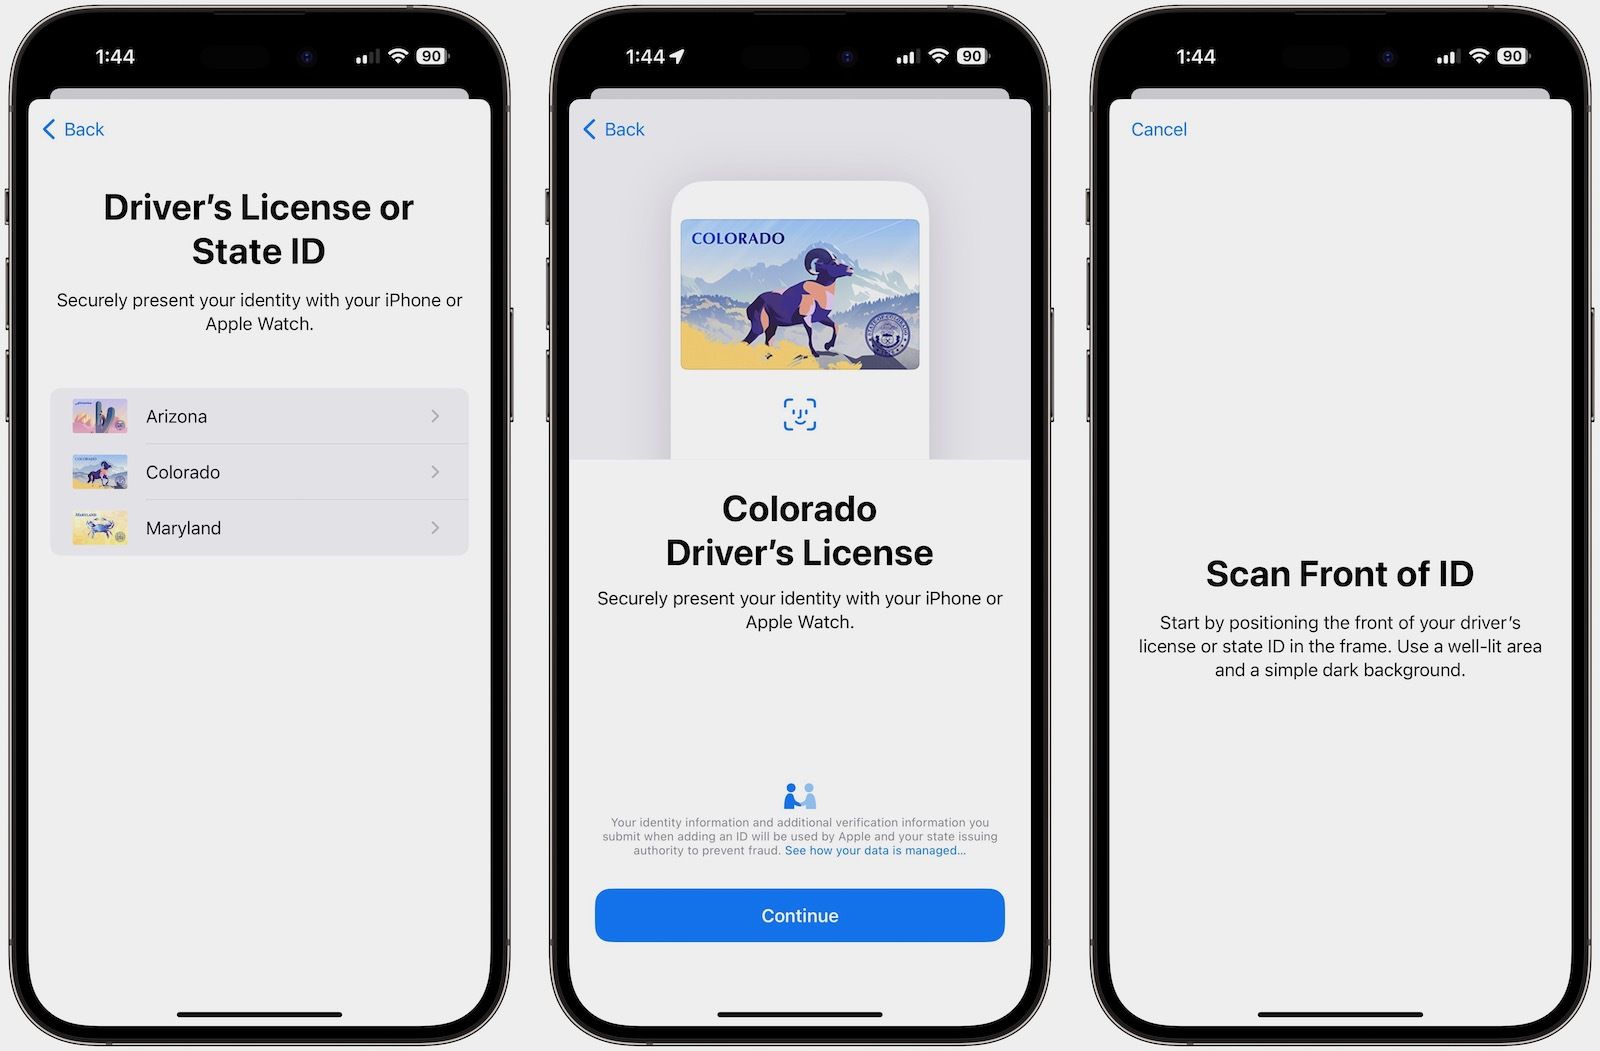 iPhone Users in Colorado Can Now Add IDs to Wallet App - macrumors.com